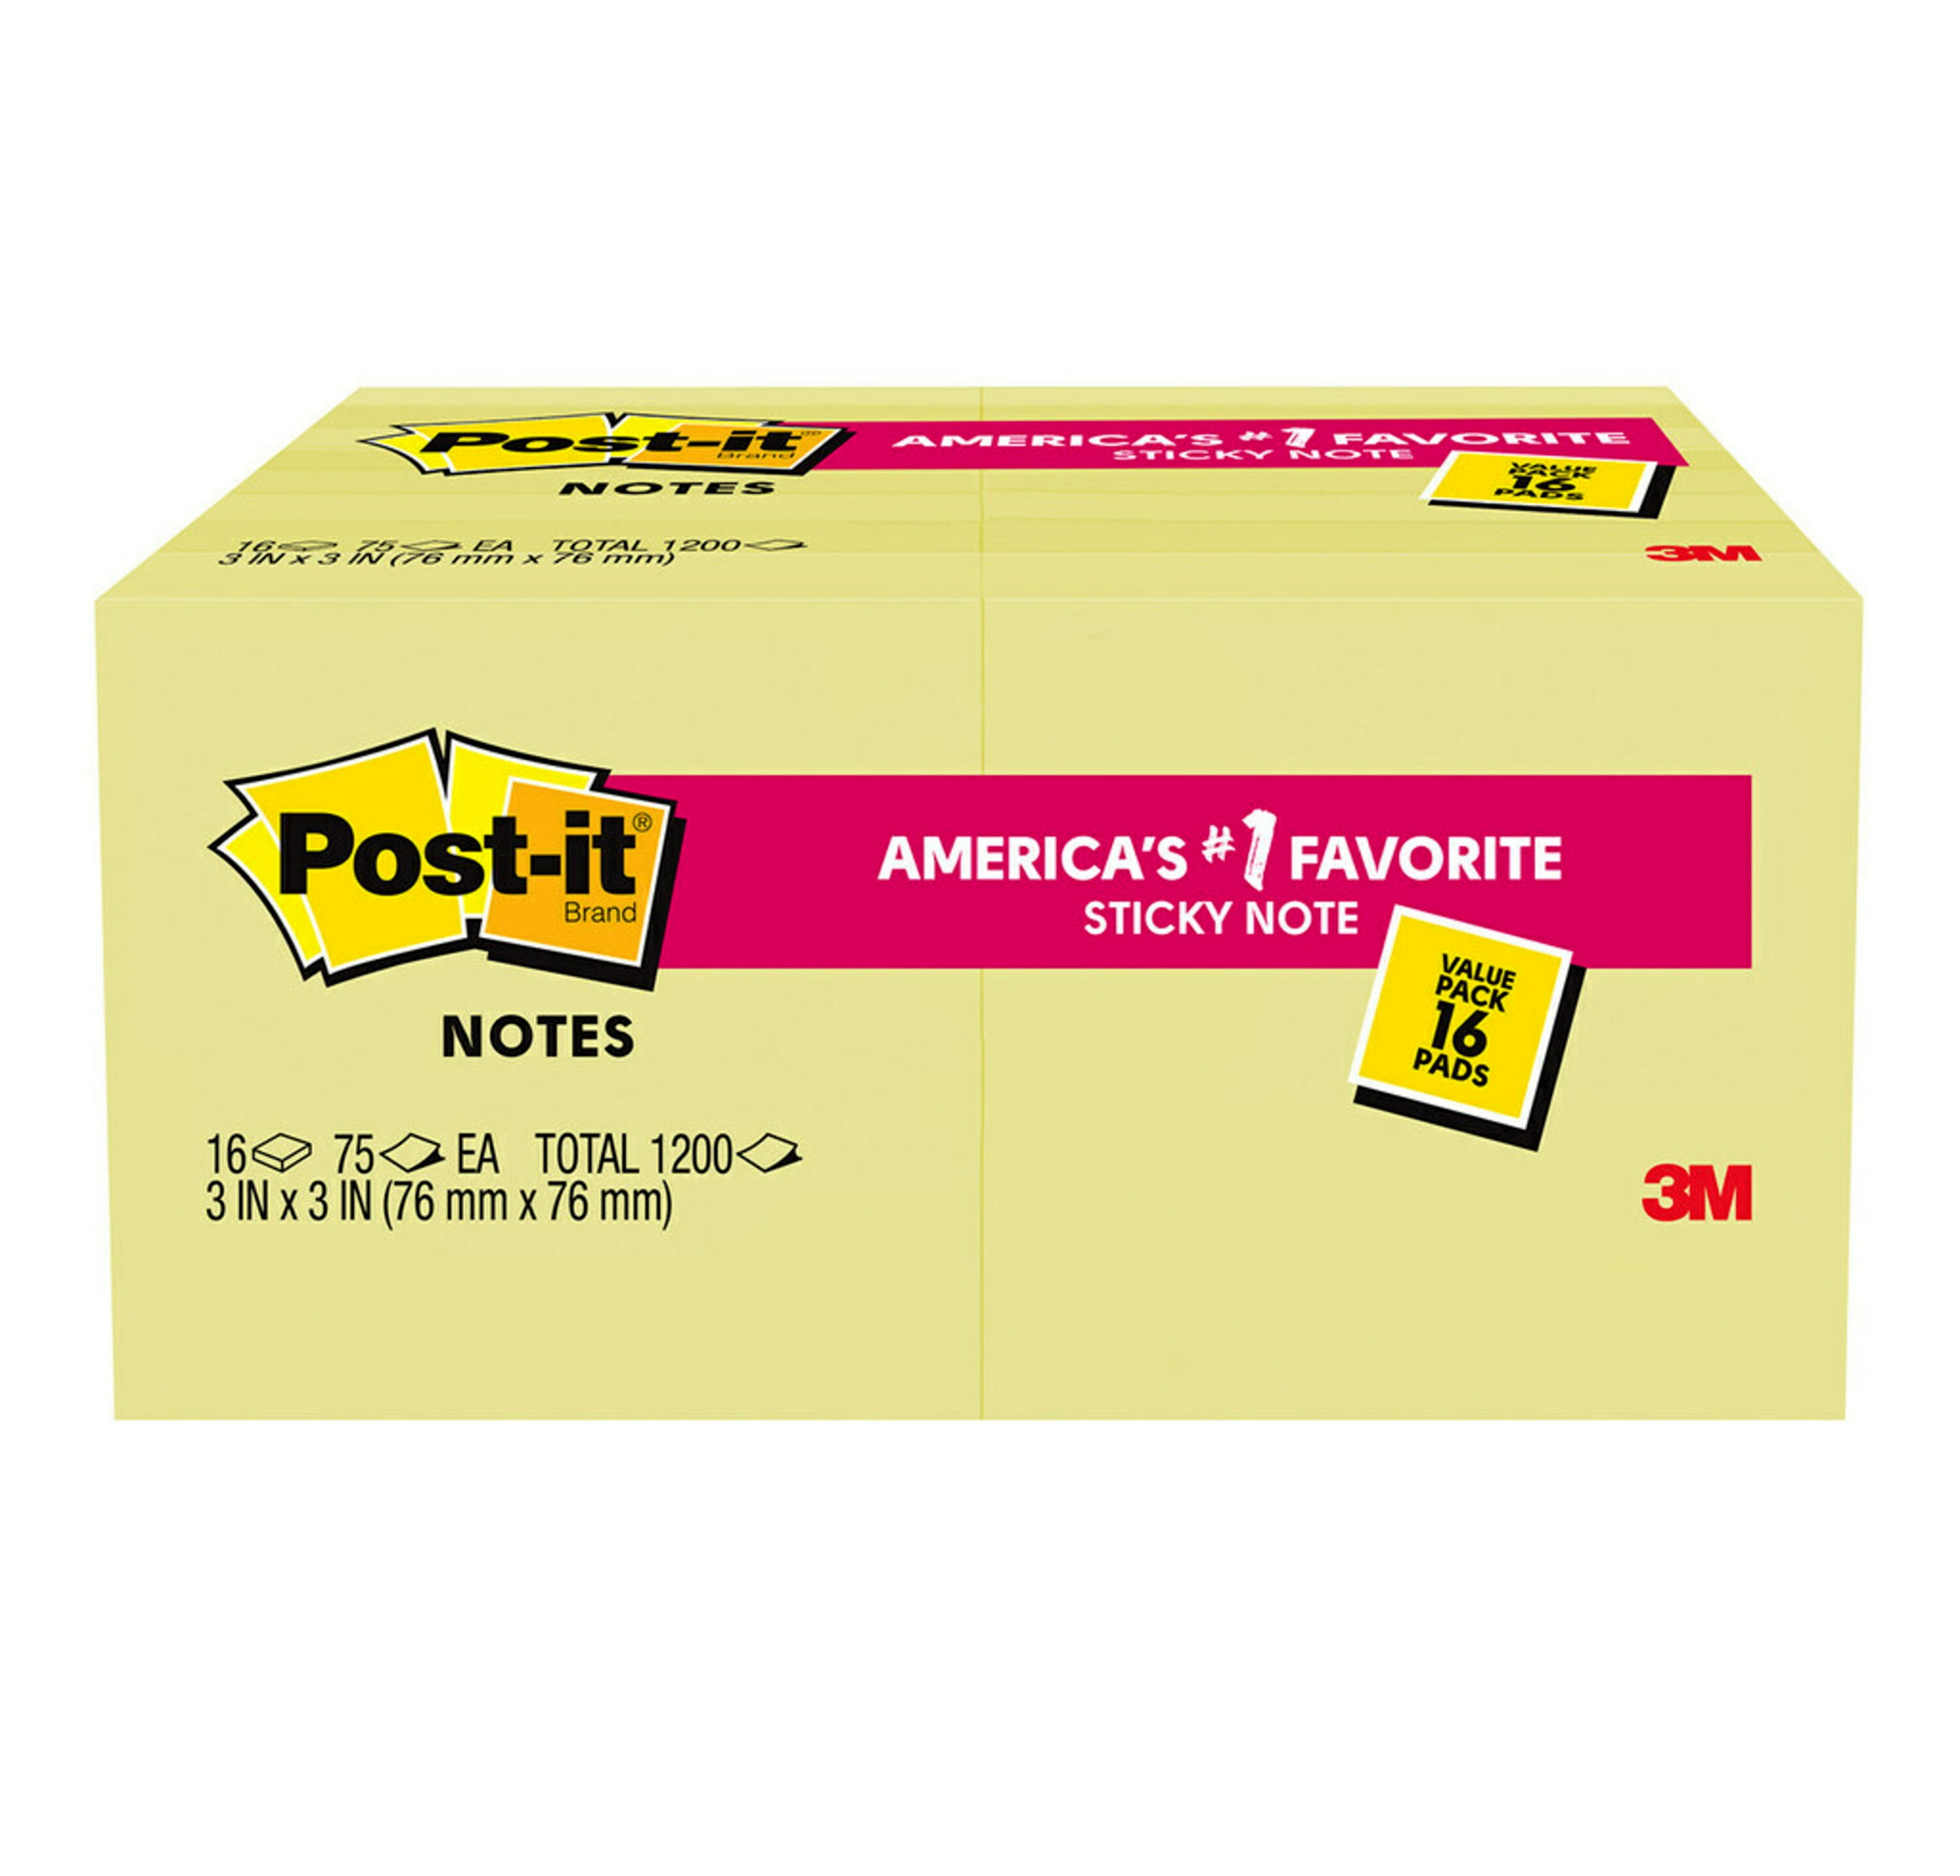 Post-it 35pk Super Sticky Notes Classroom Value Pack